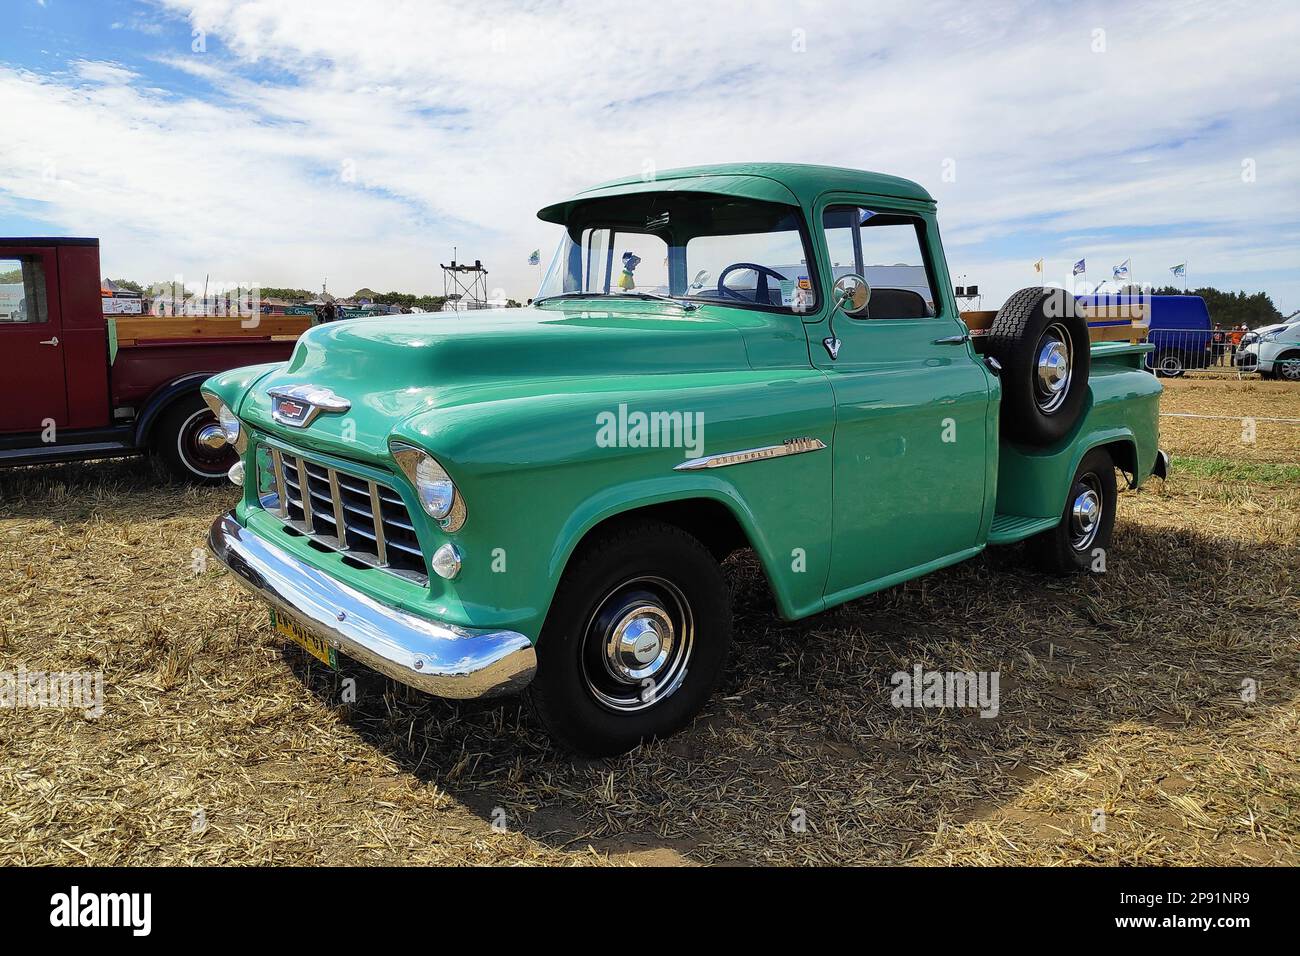 Pleyber-Christ, France - August, 28 2022: Green 1955 Chevrolet 3100 pick-up truck known as Task Force. Stock Photo